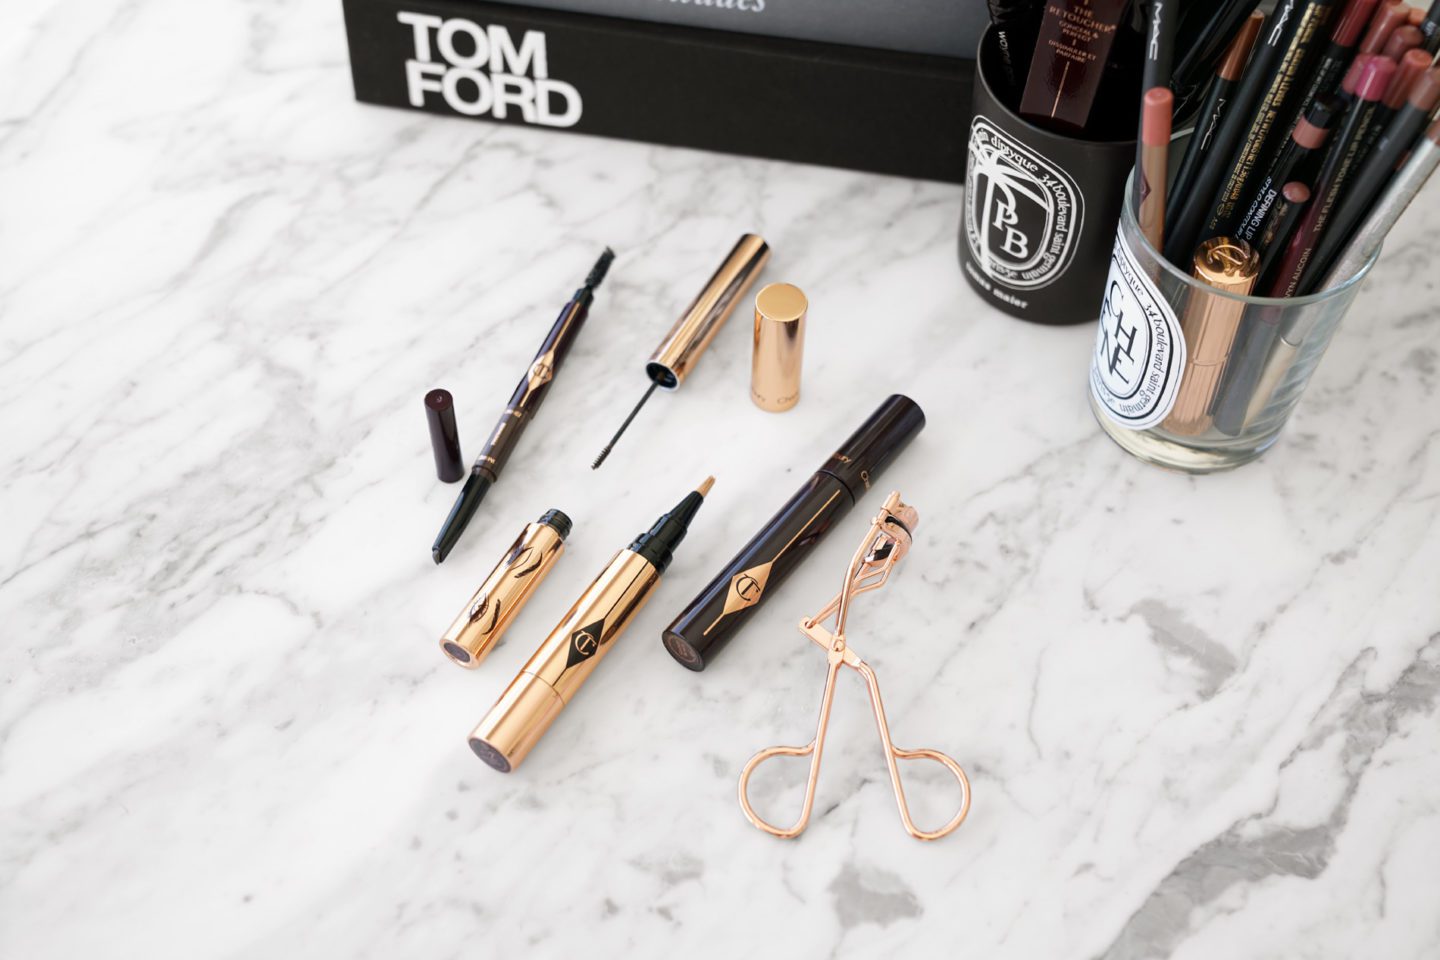 Charlotte Tilbury Supermodel Brow Kit Review | The Beauty Look Book